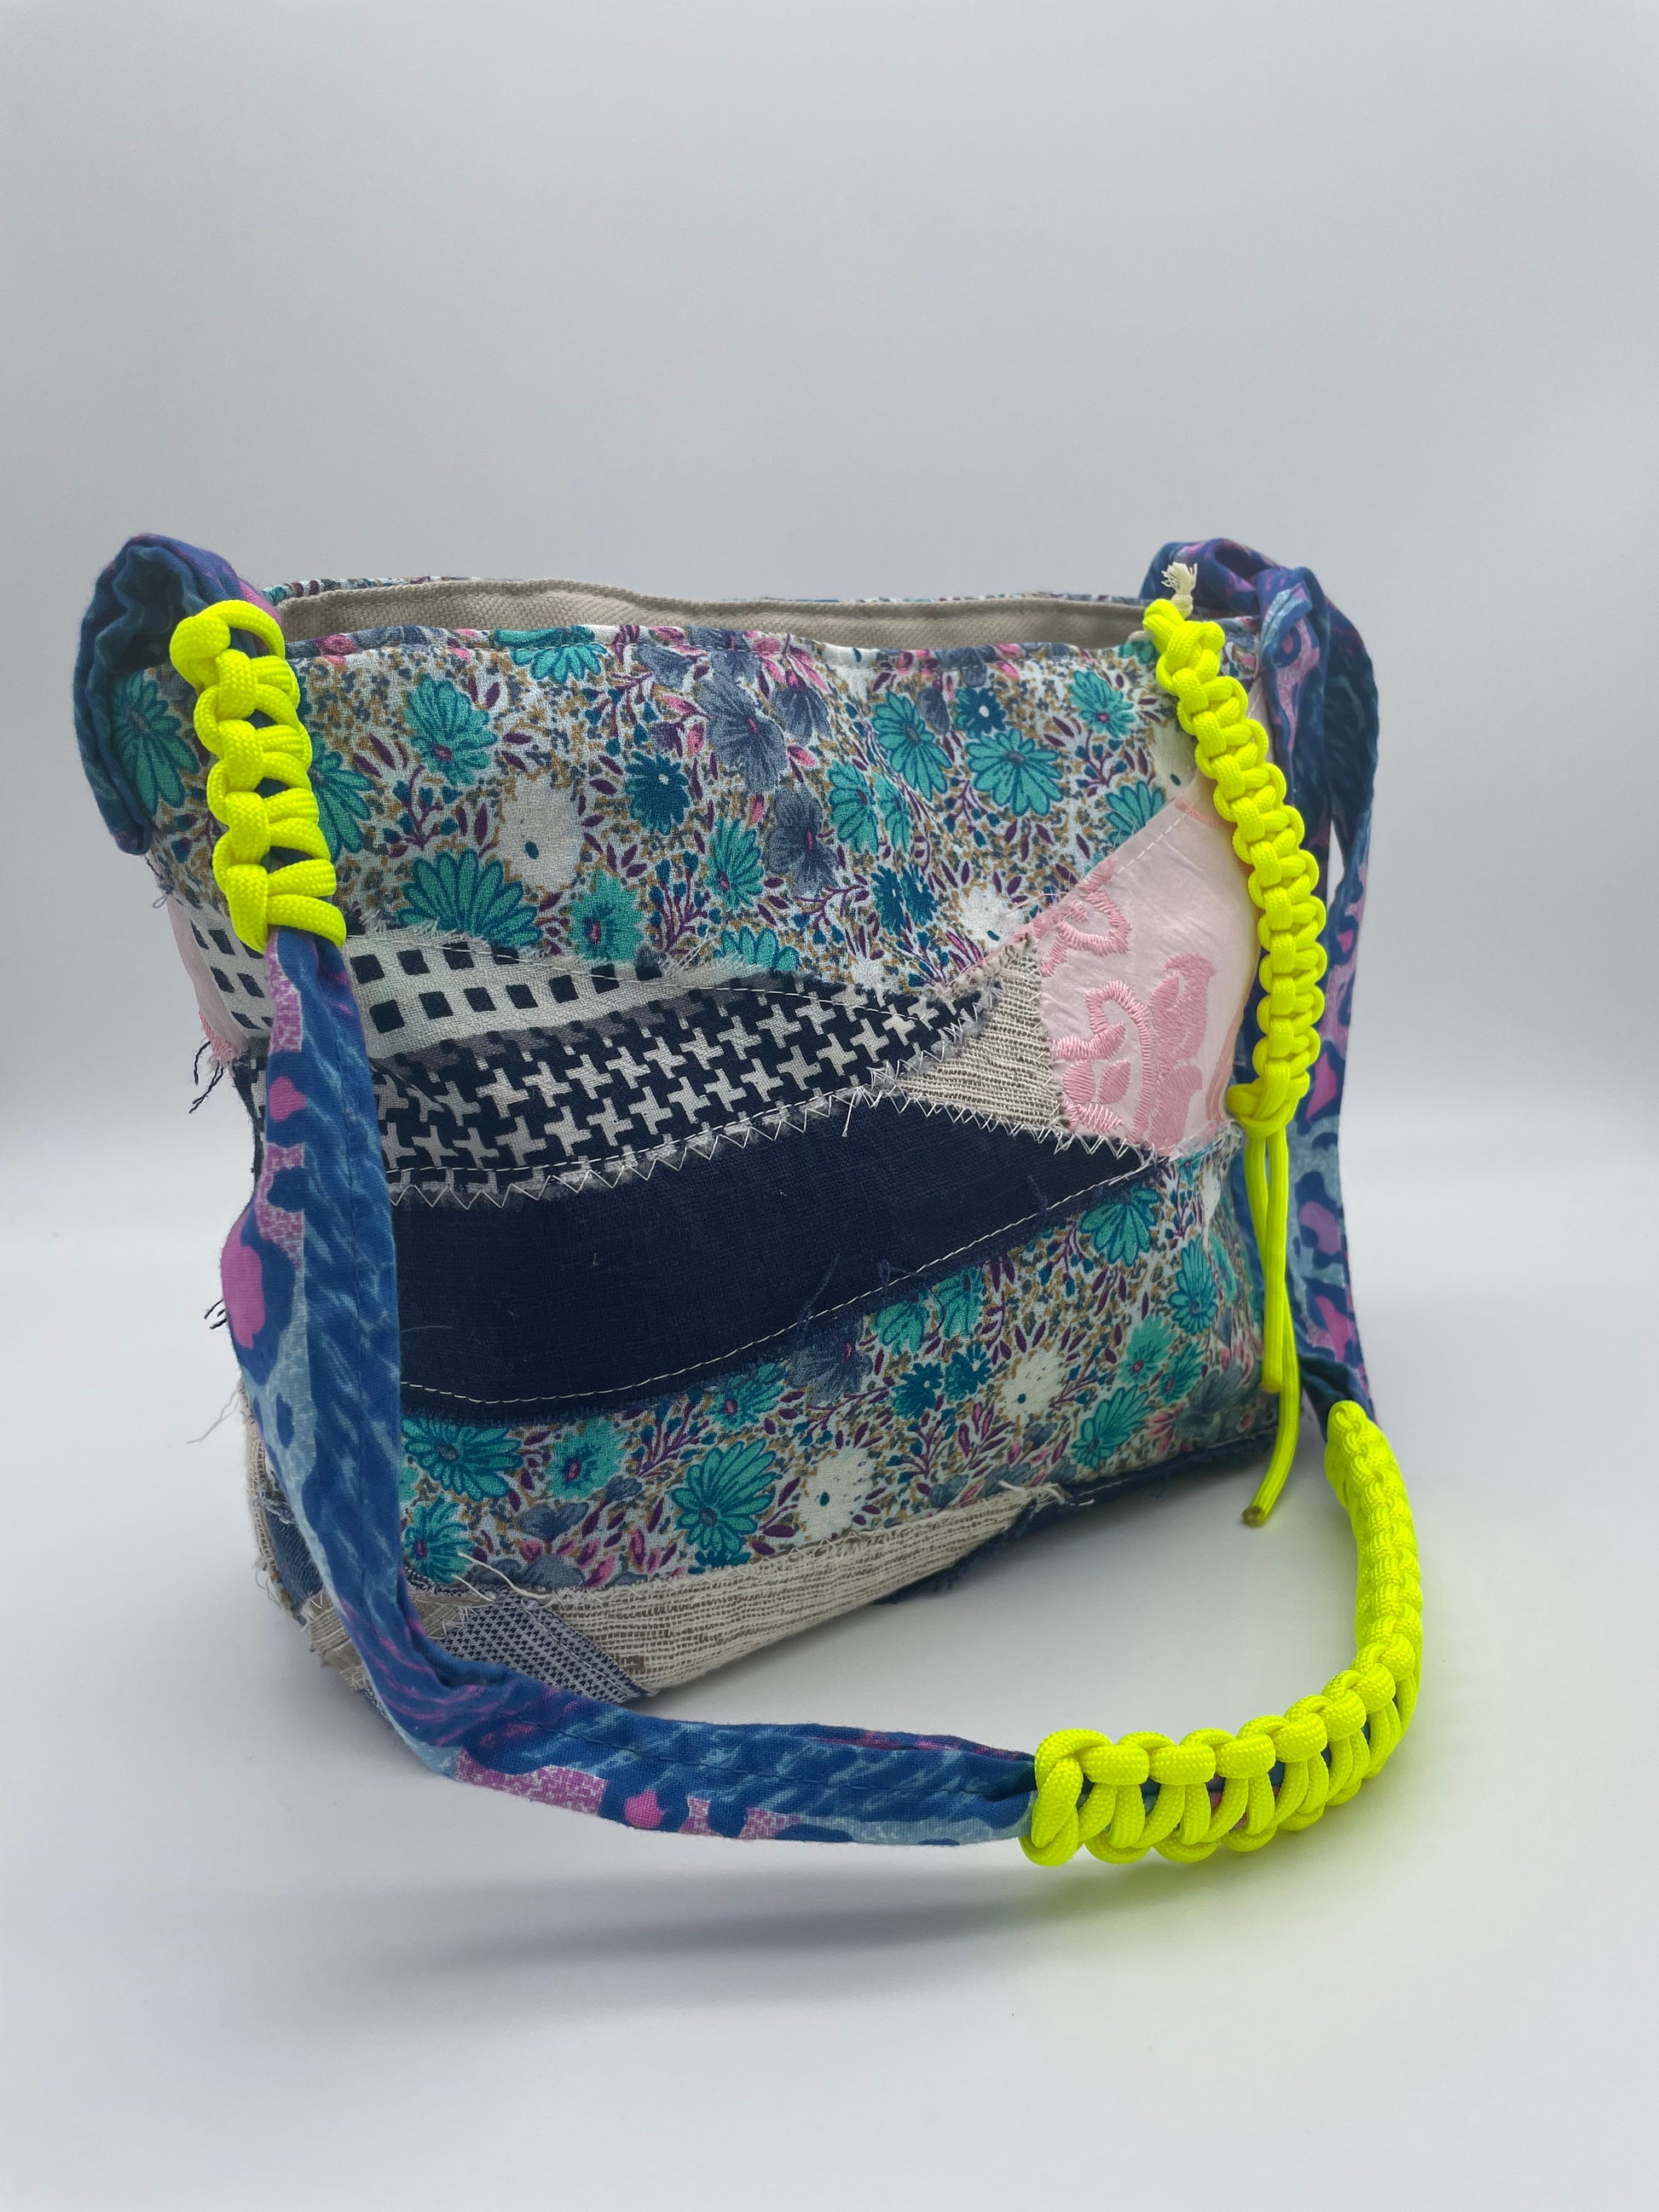 upcycling patchwork bag handmade upcycled shoulderbag neon yellow fabric scraps